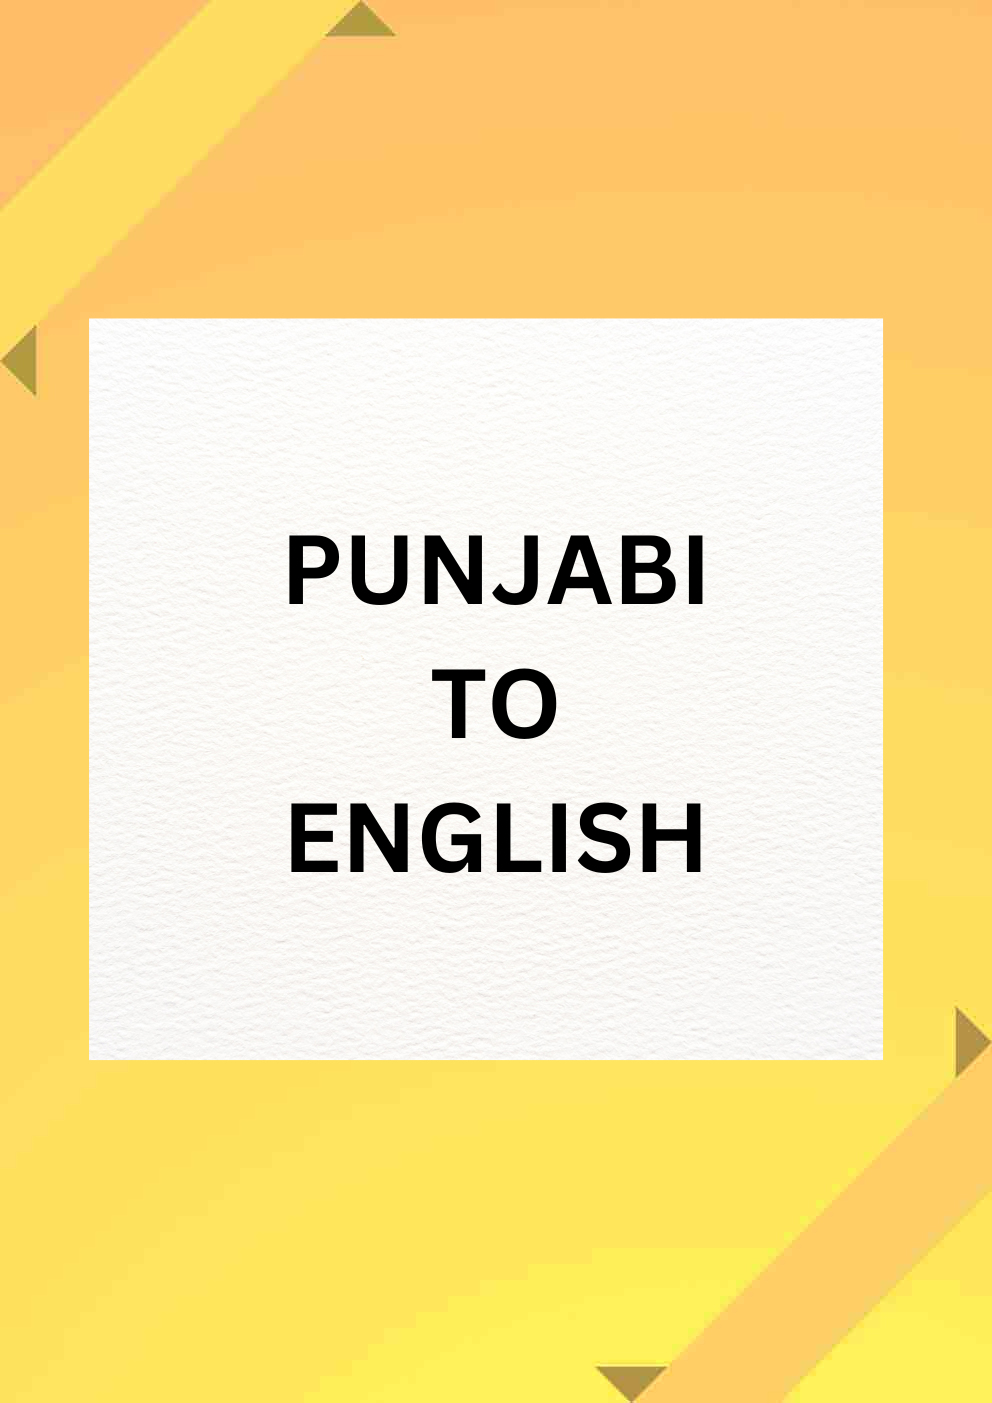 Punjabi to English Certified Translation of Birth Certificate, Marriage Certificate and other Documents